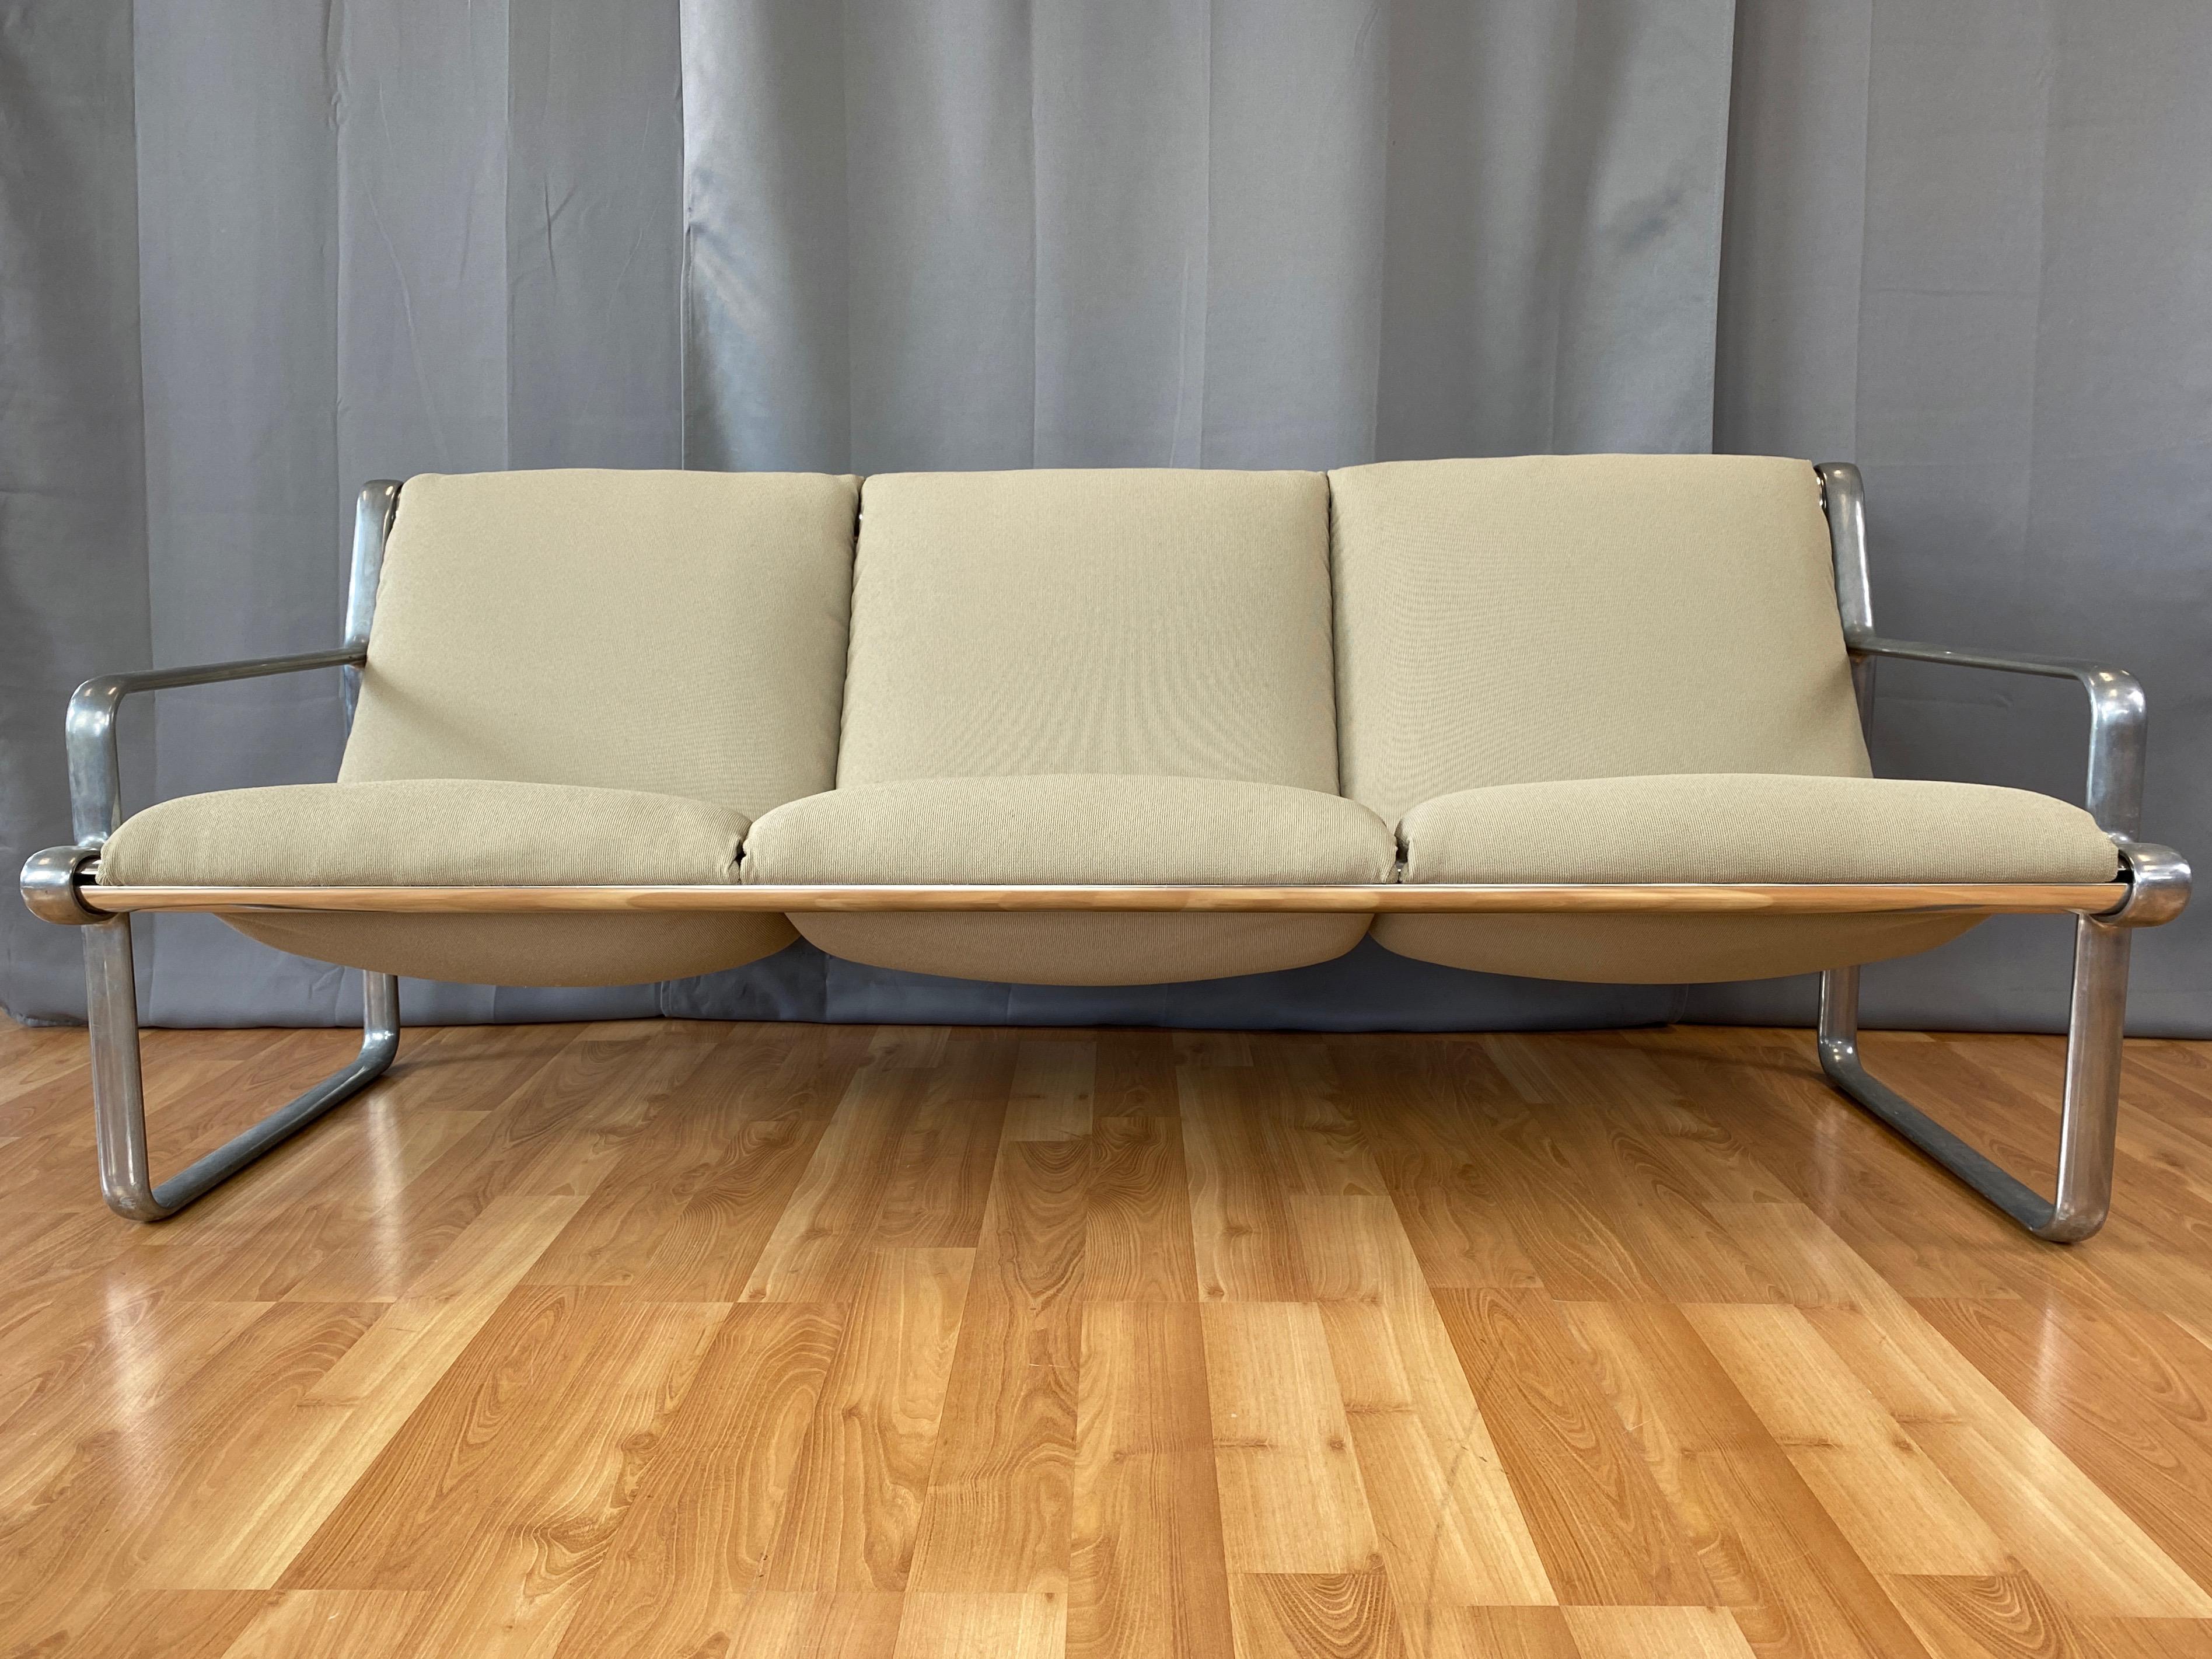 A very inviting and comfortable 1971 Knoll International aluminum three-seat sling sofa by Bruce Hannah & Andrew Morrison with new Maharam upholstery.

Minimalist and sleek cast aluminum frame with satin finish open arm sides connected by a pair of